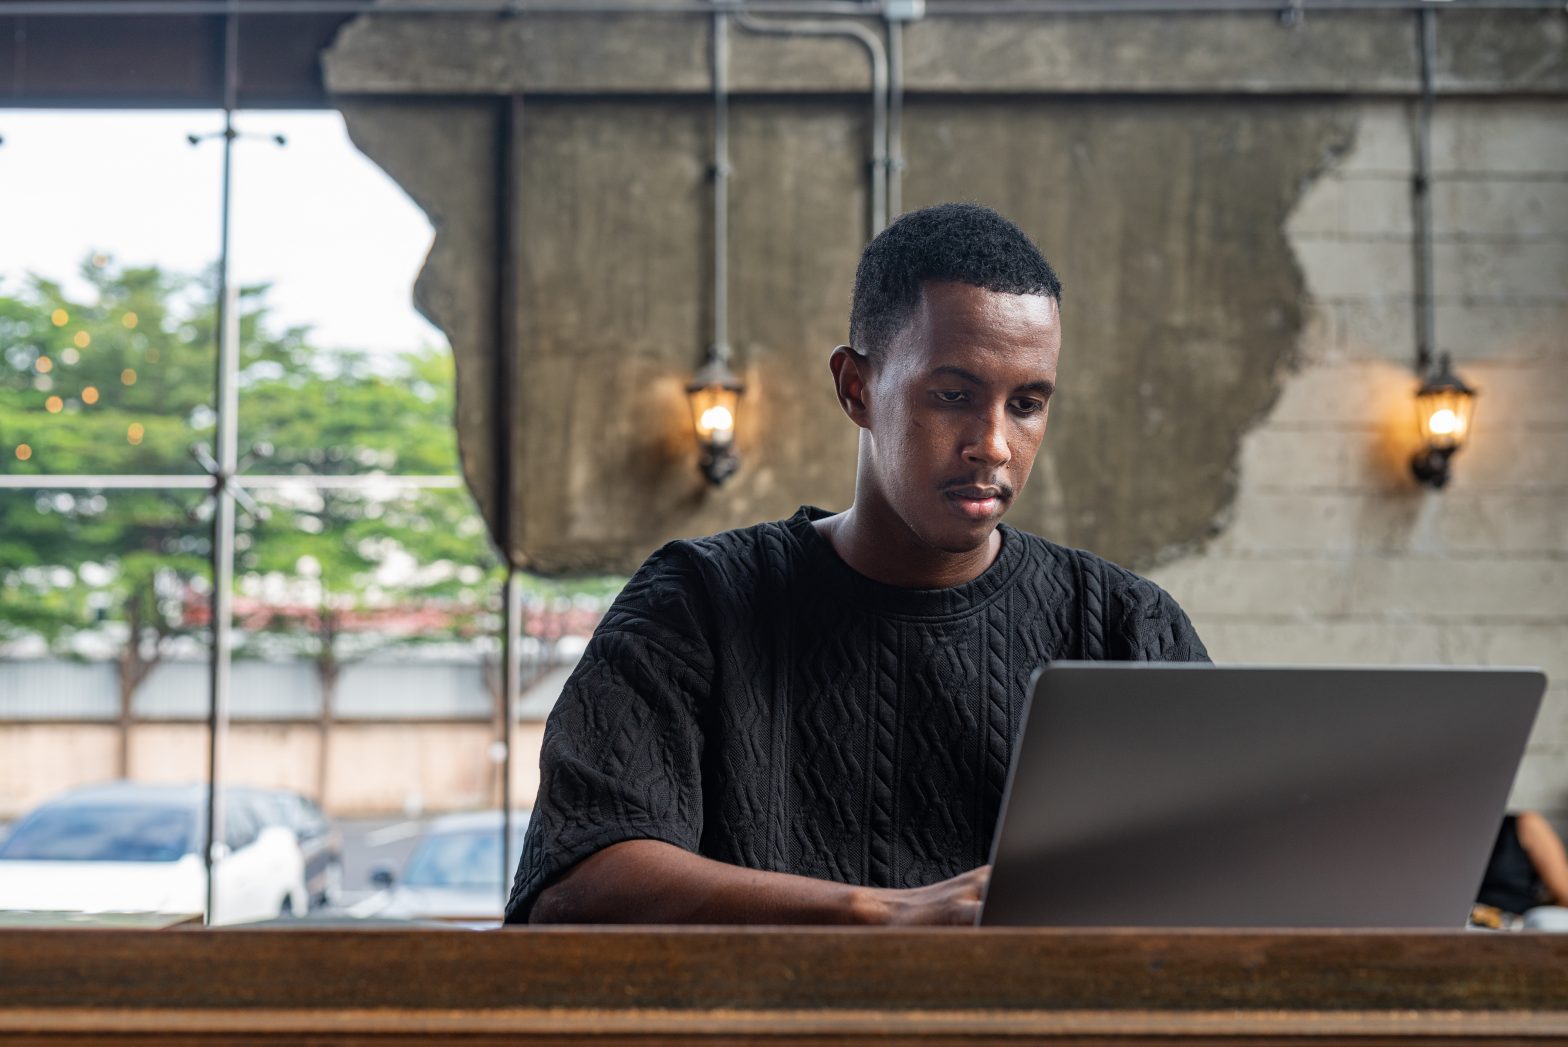 Portrait of black man sitting and using laptop computer indoors